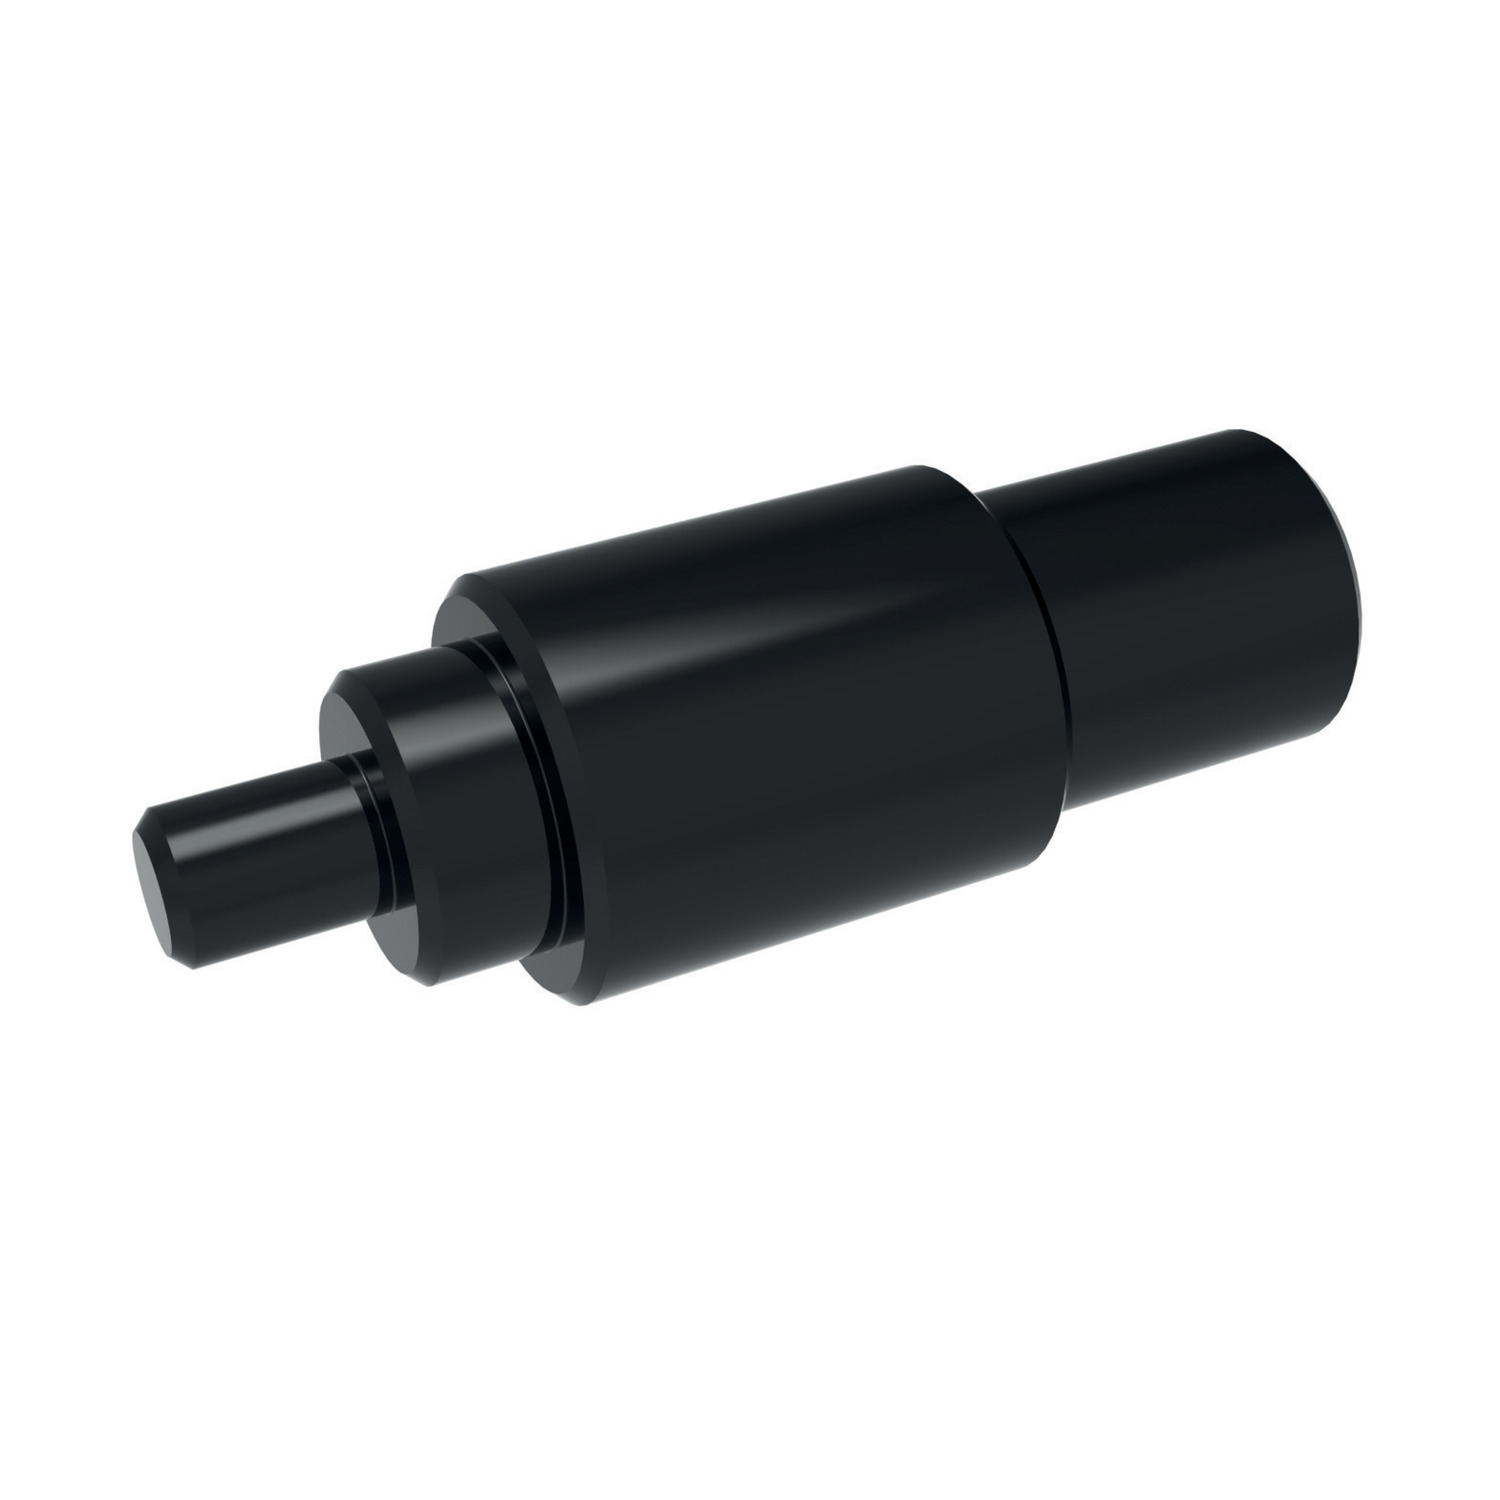 Product 22064, Installation Tool - Inch - Heavy Duty for threaded inserts 22010 & 22012 / 